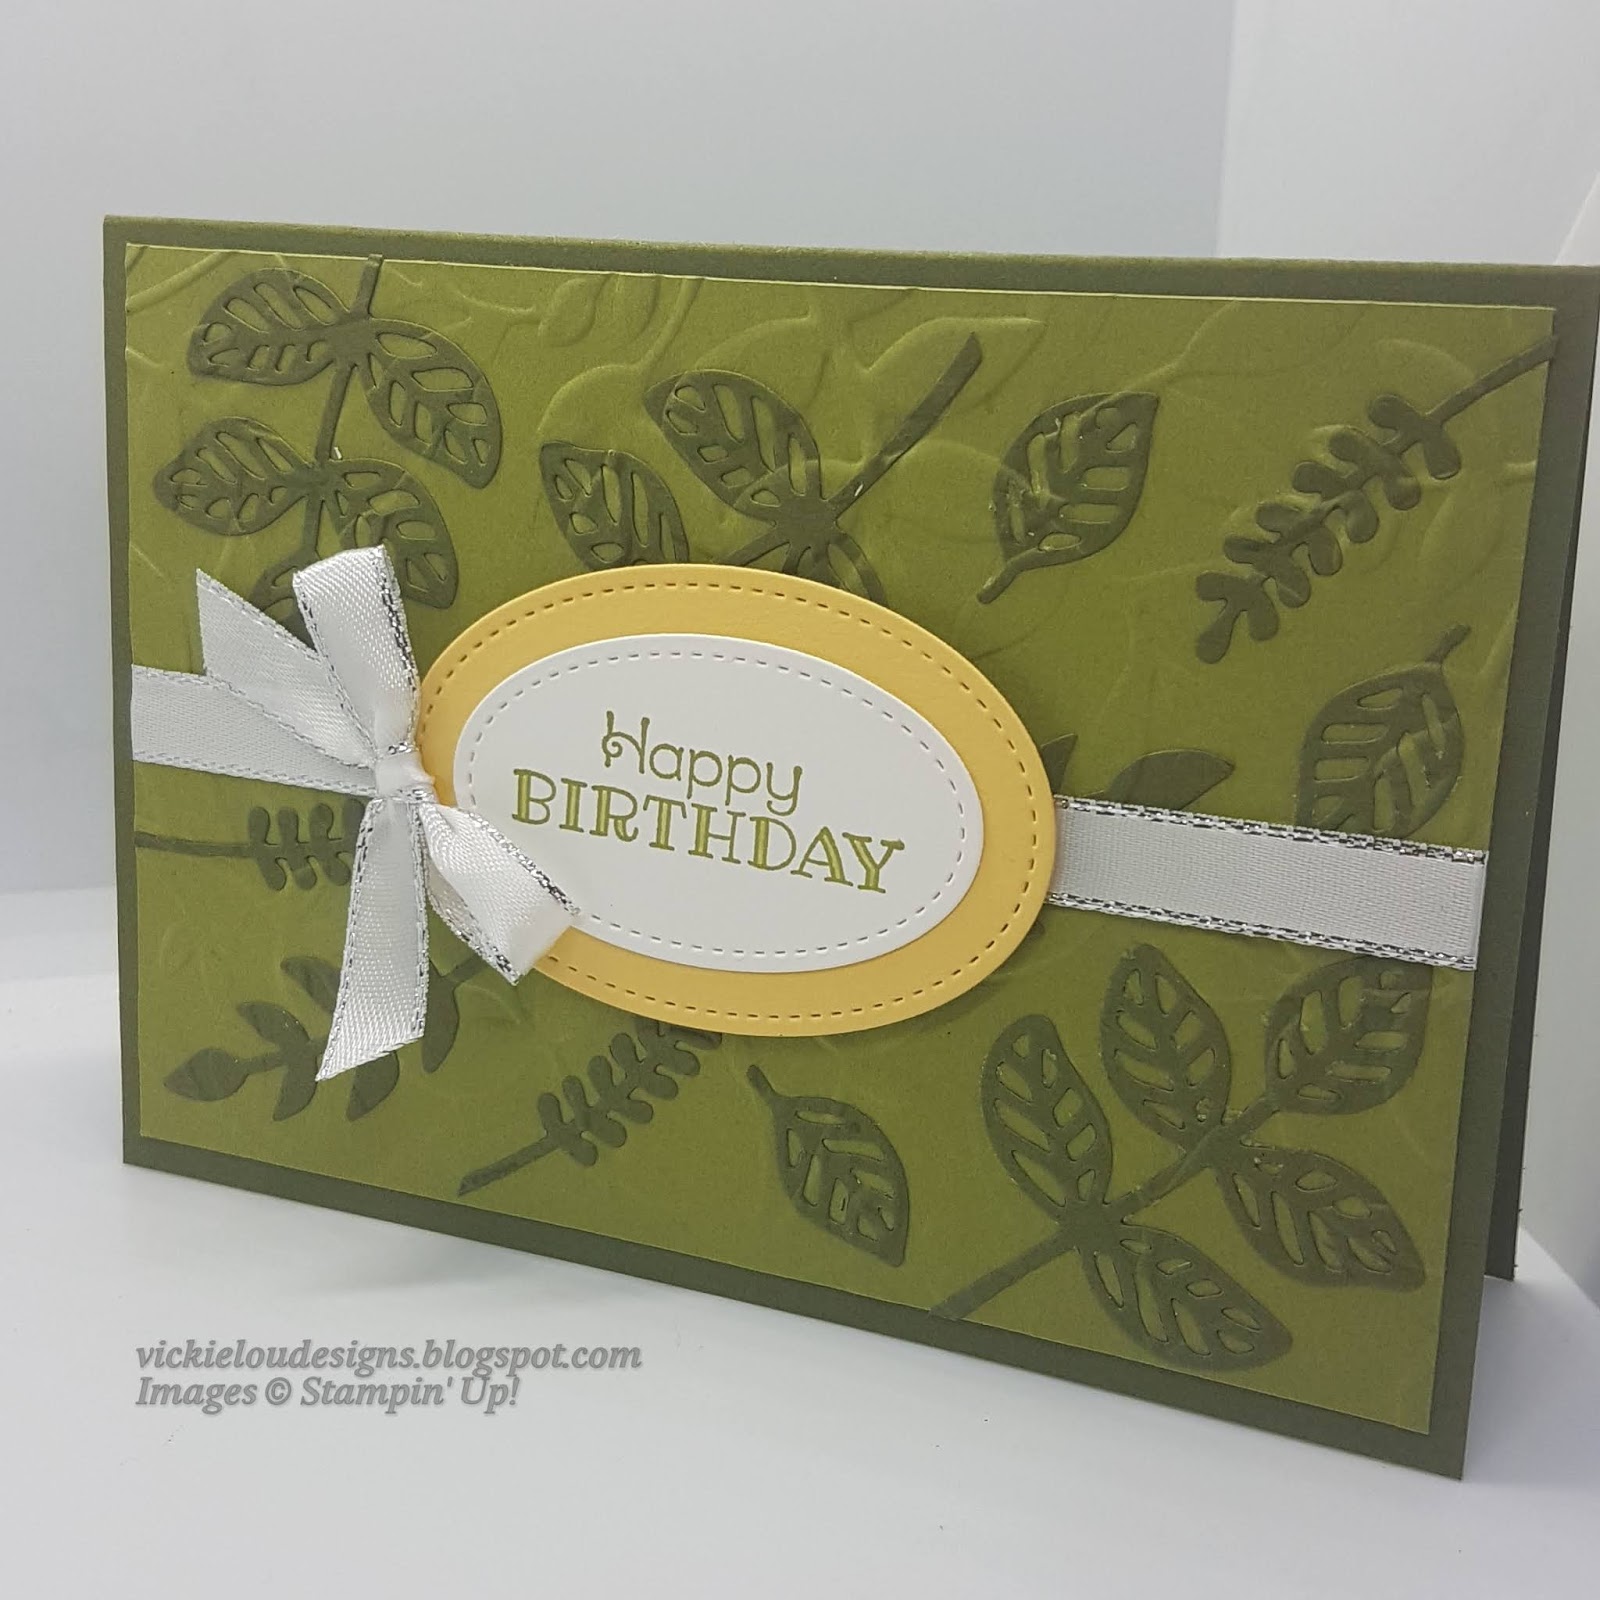 Vickie Lou Designs: Inlaid Embossing Happy Birthday Card using Stampin ...